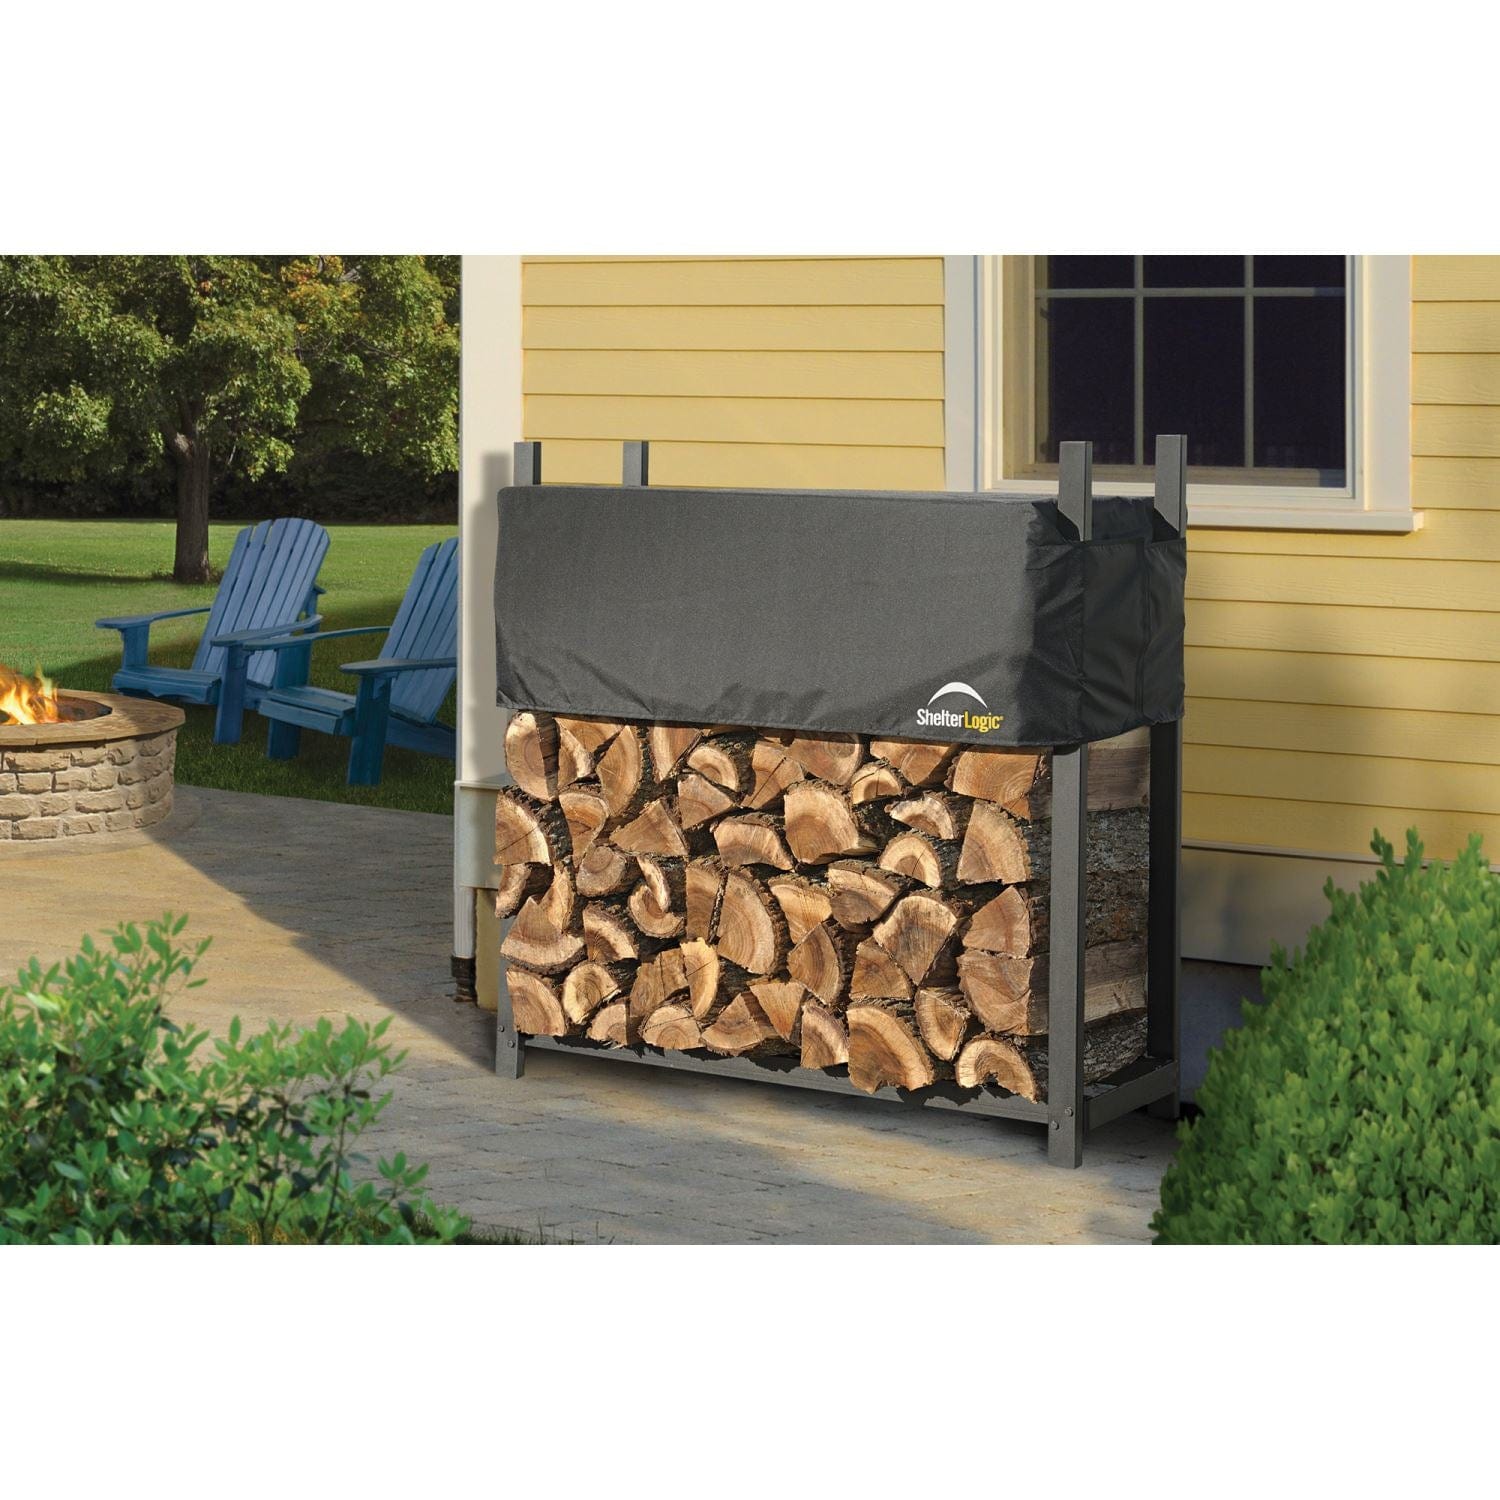 ShelterLogic Firewood & Hearth Products ShelterLogic | Ultra Duty Firewood Rack 4 ft. With Cover 90474